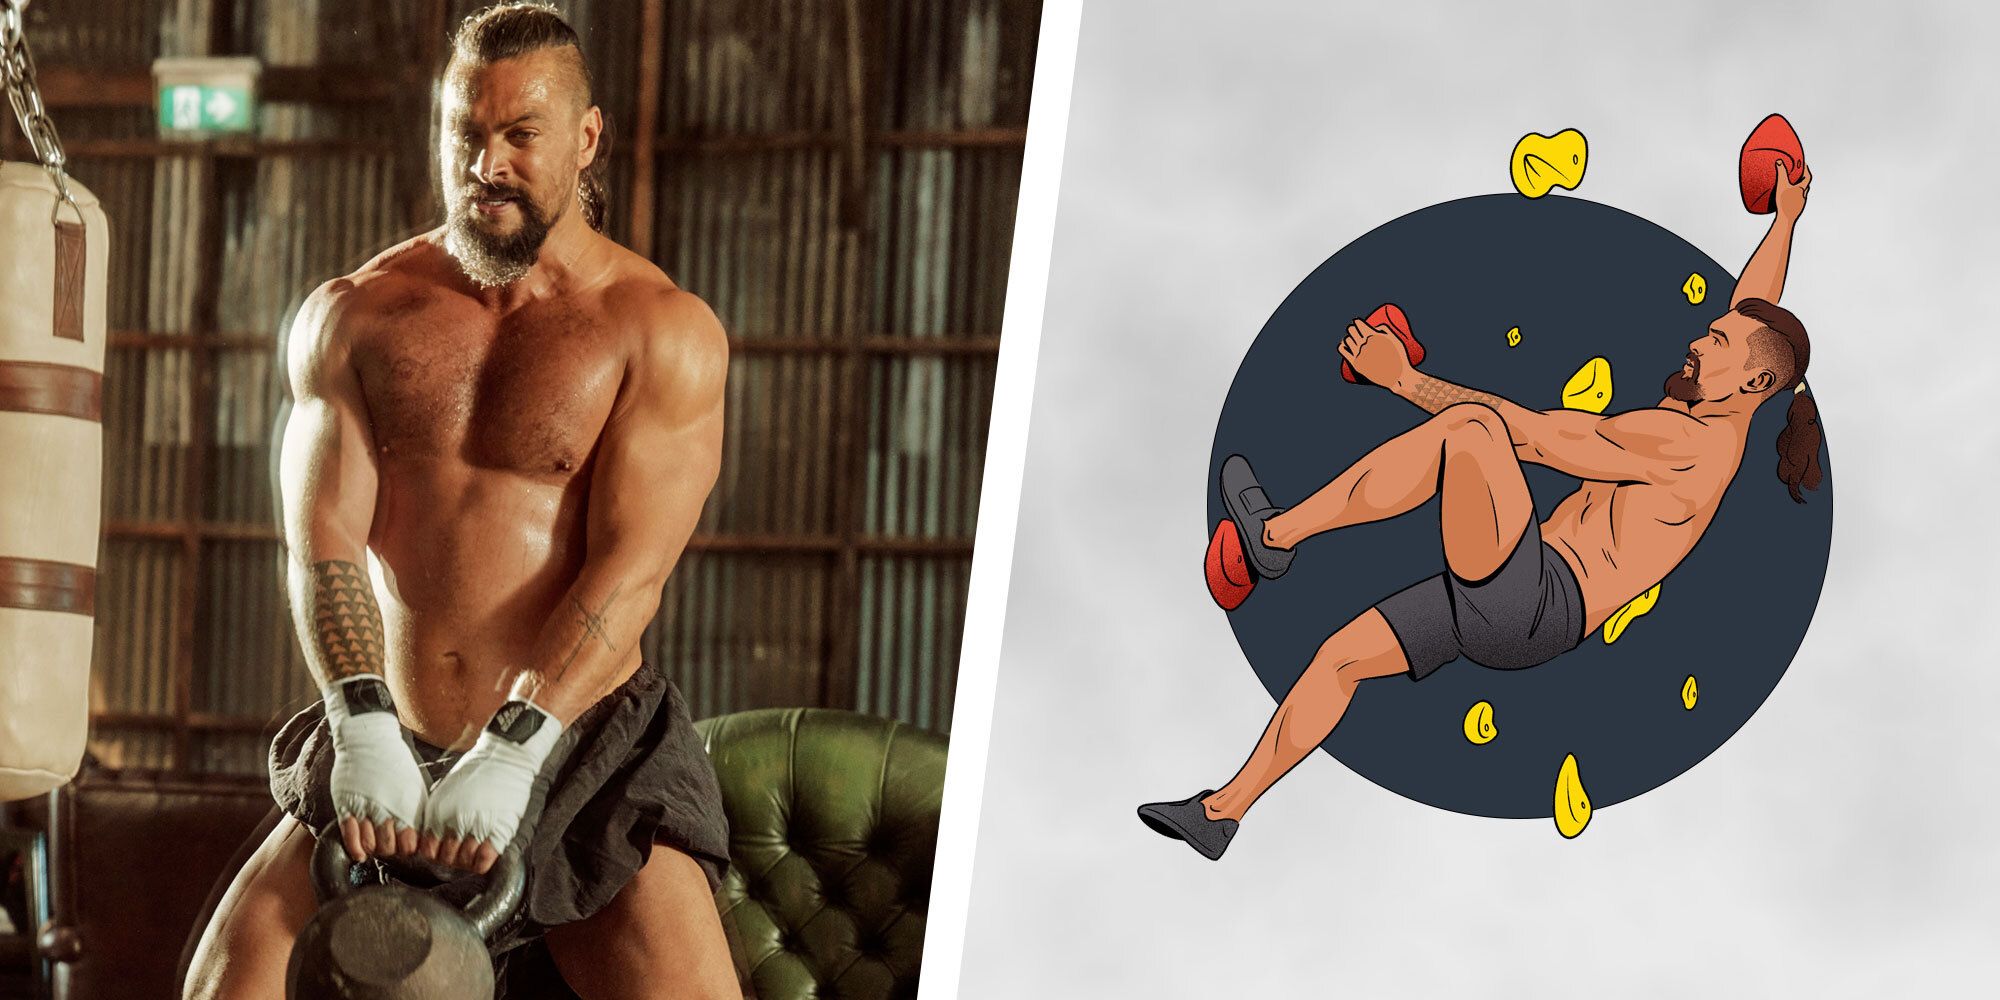 High Speed Yoga Sex Video - Jason Momoa Uses These Exercises to Workout for 'Fast X'